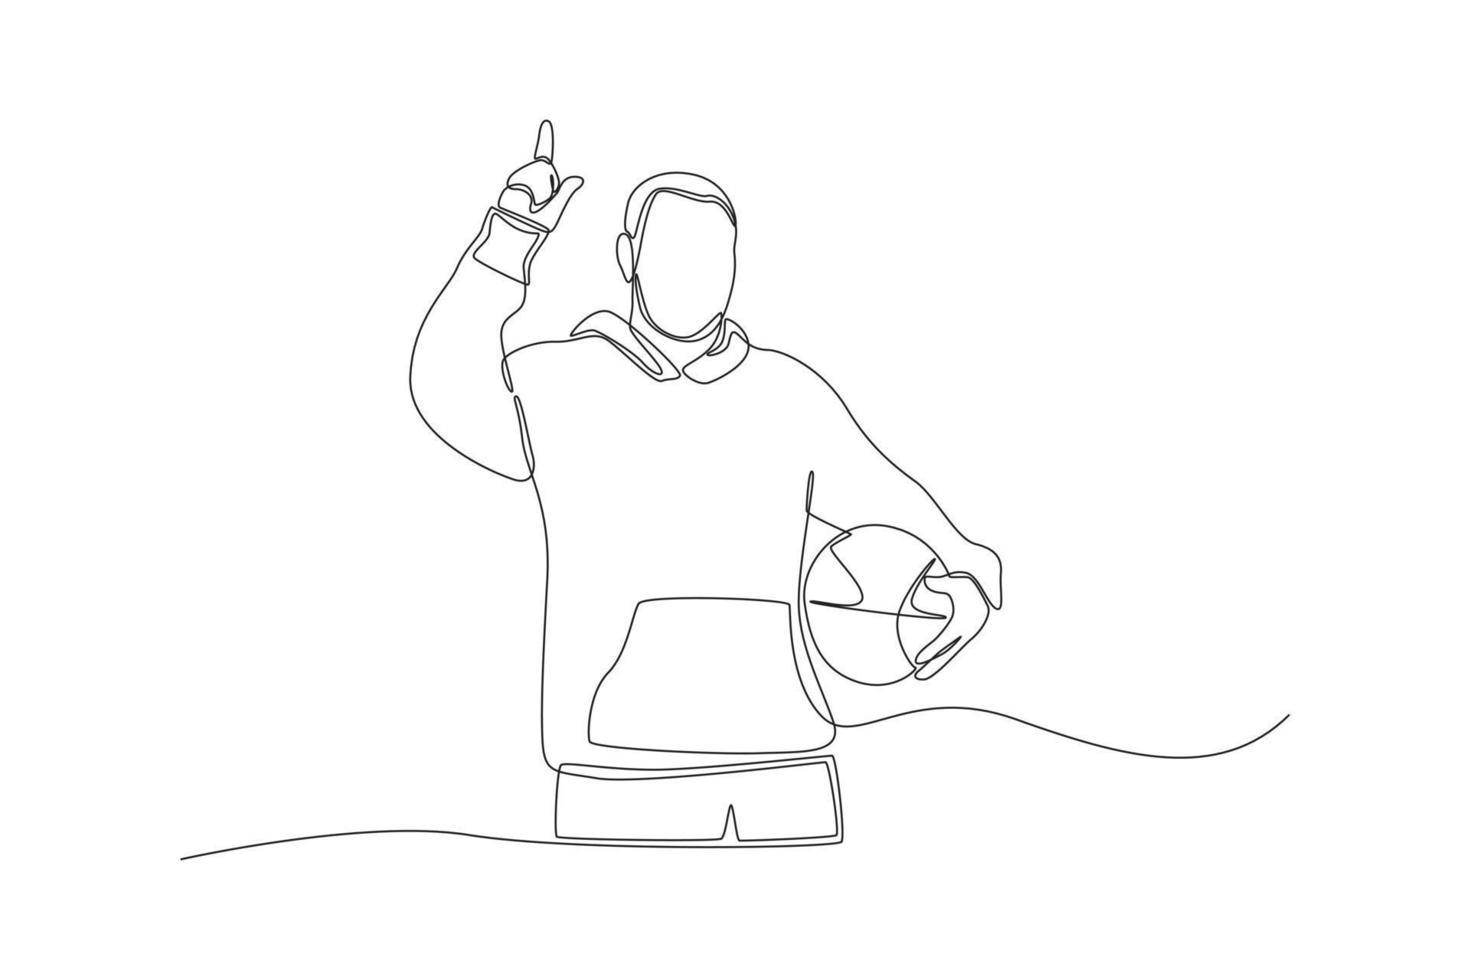 Single one line drawing sportsman with his basket ball pointing up. Pointing concept. Continuous line draw design graphic vector illustration.